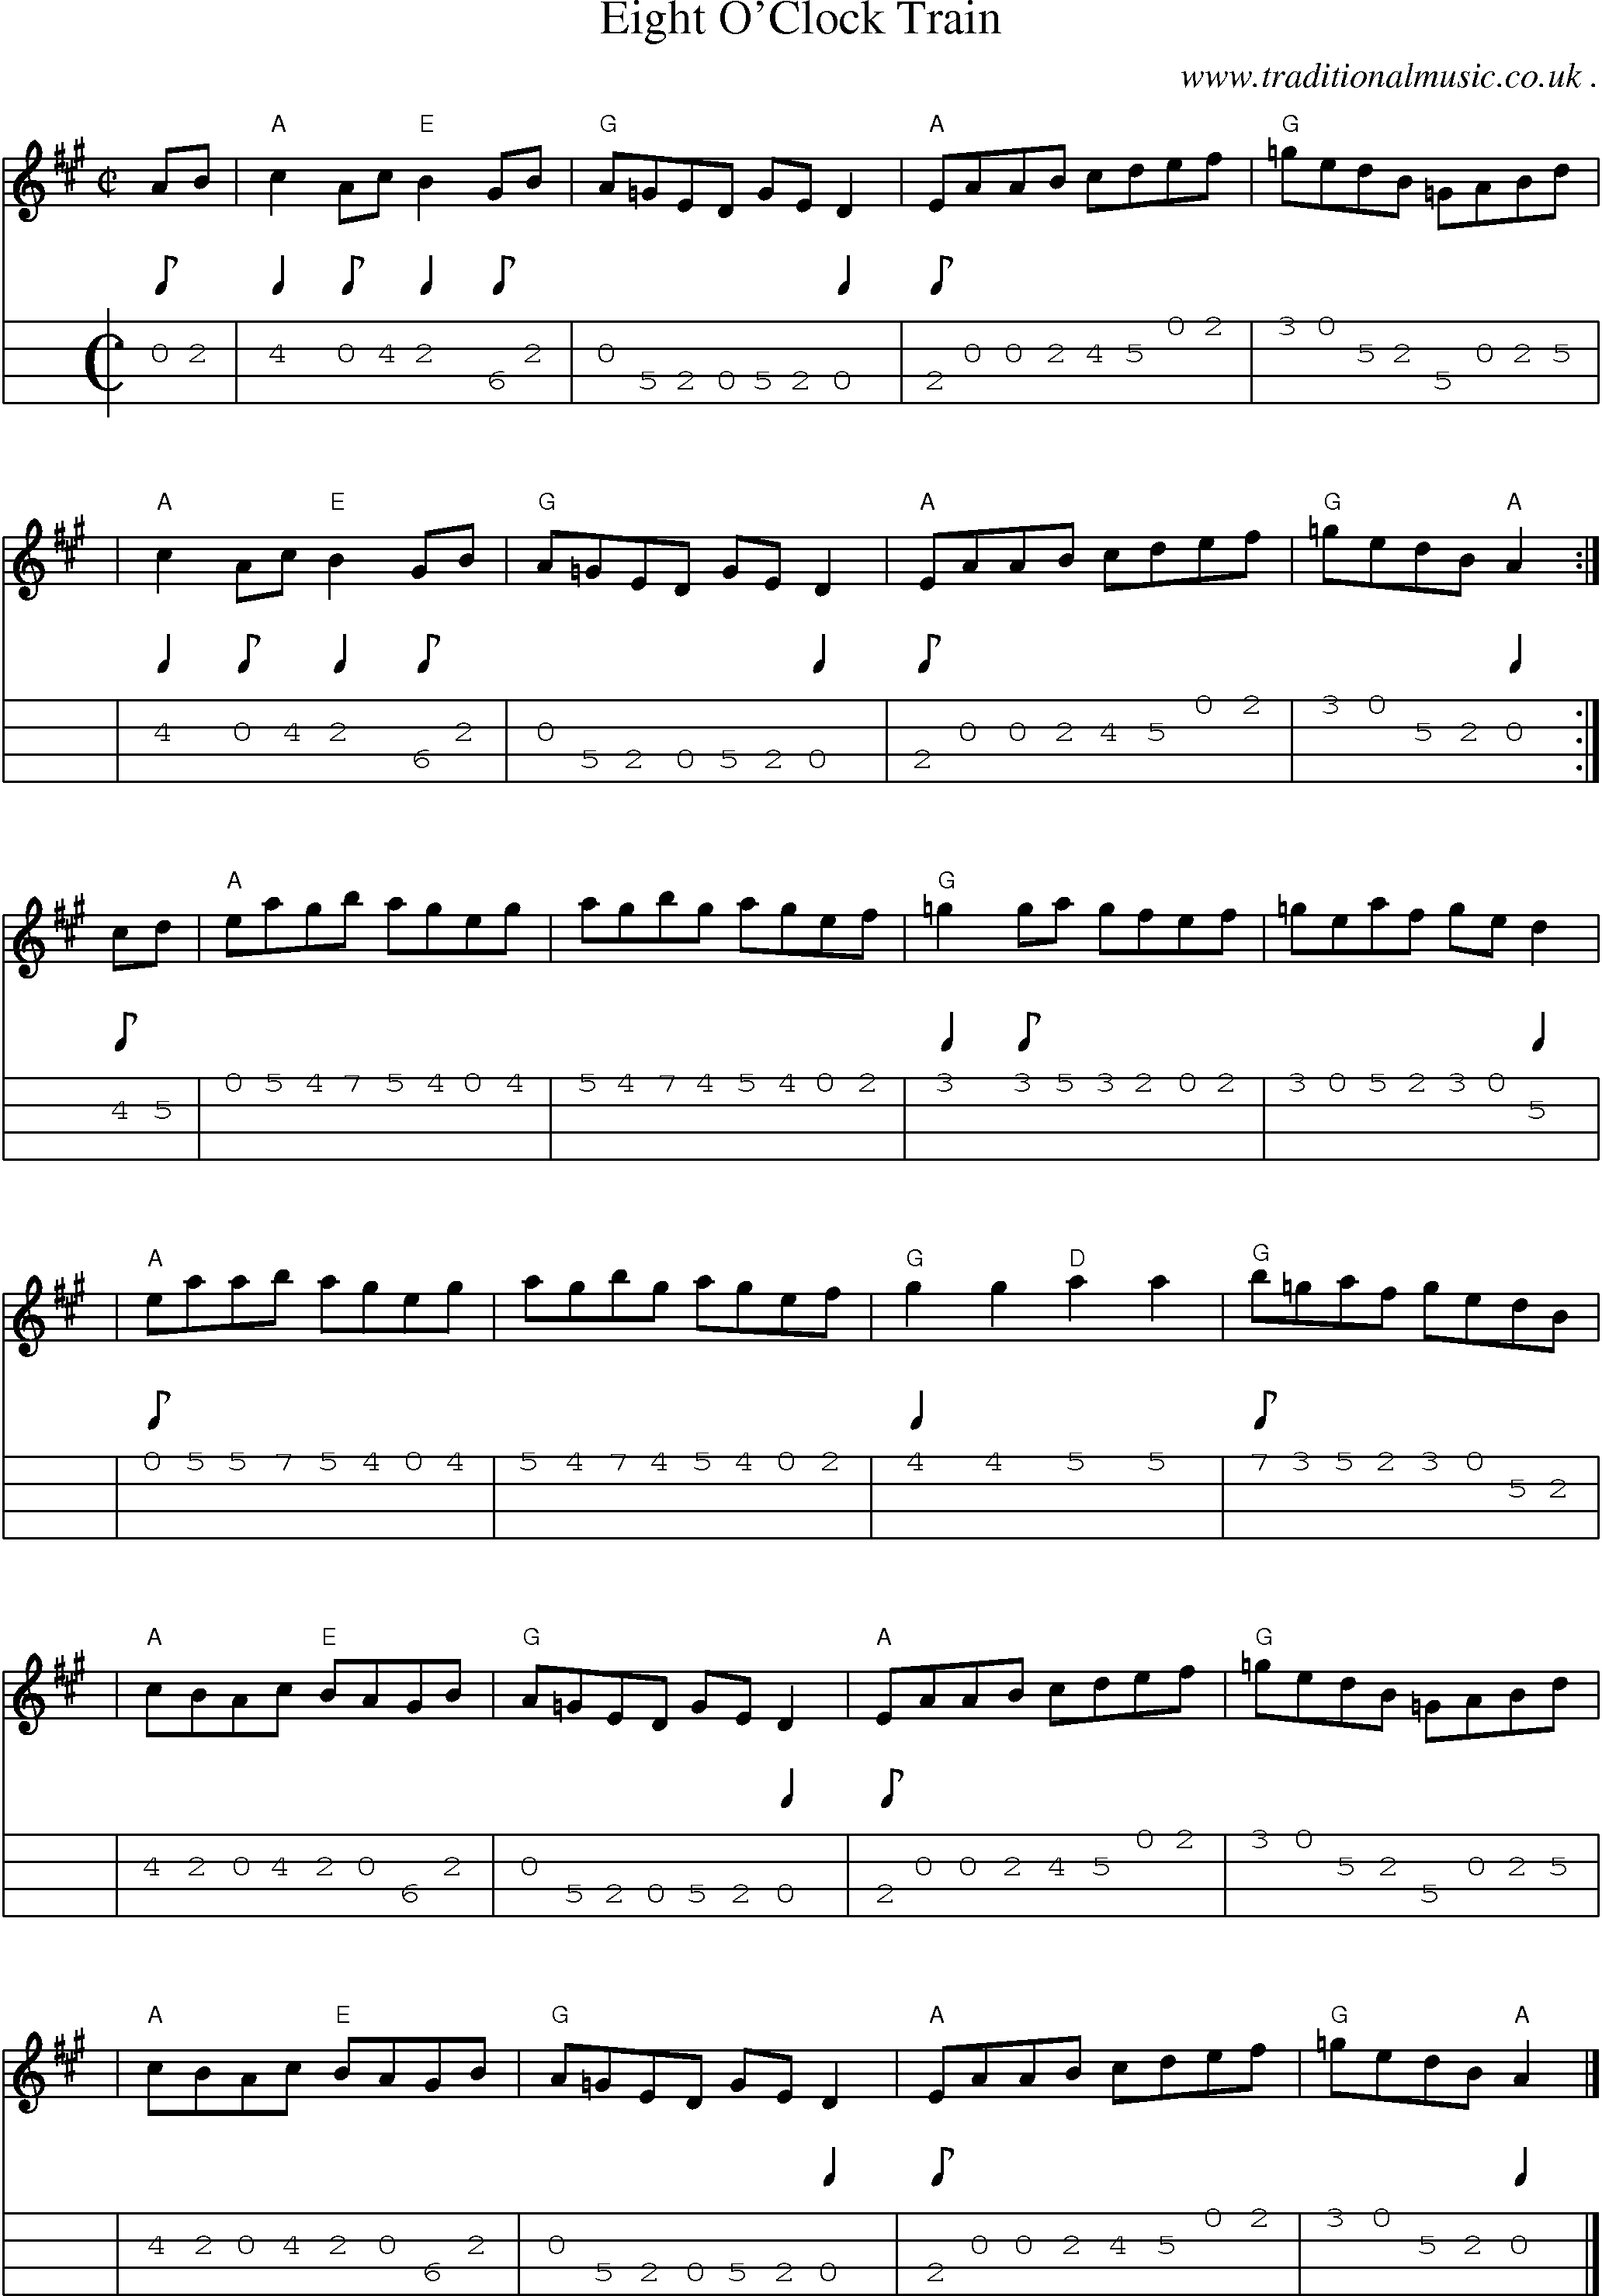 Sheet-music  score, Chords and Mandolin Tabs for Eight Oclock Train